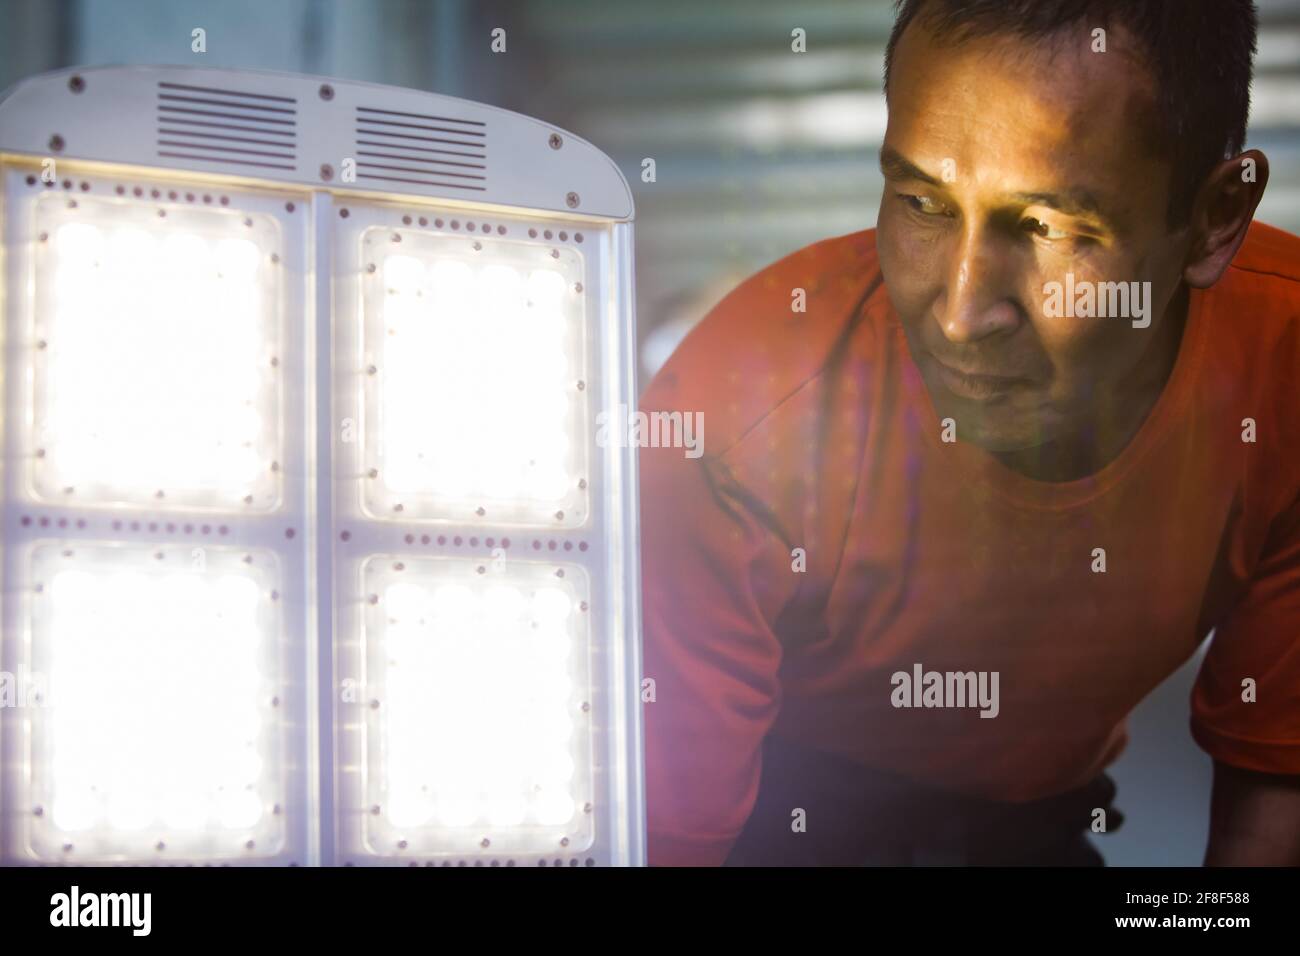 Aktau, Kazakhstan - May 19, 2012: Asian man worker looking at Street illumination LED light panel. Light ON. Light flares (right, center) is out of f Stock Photo